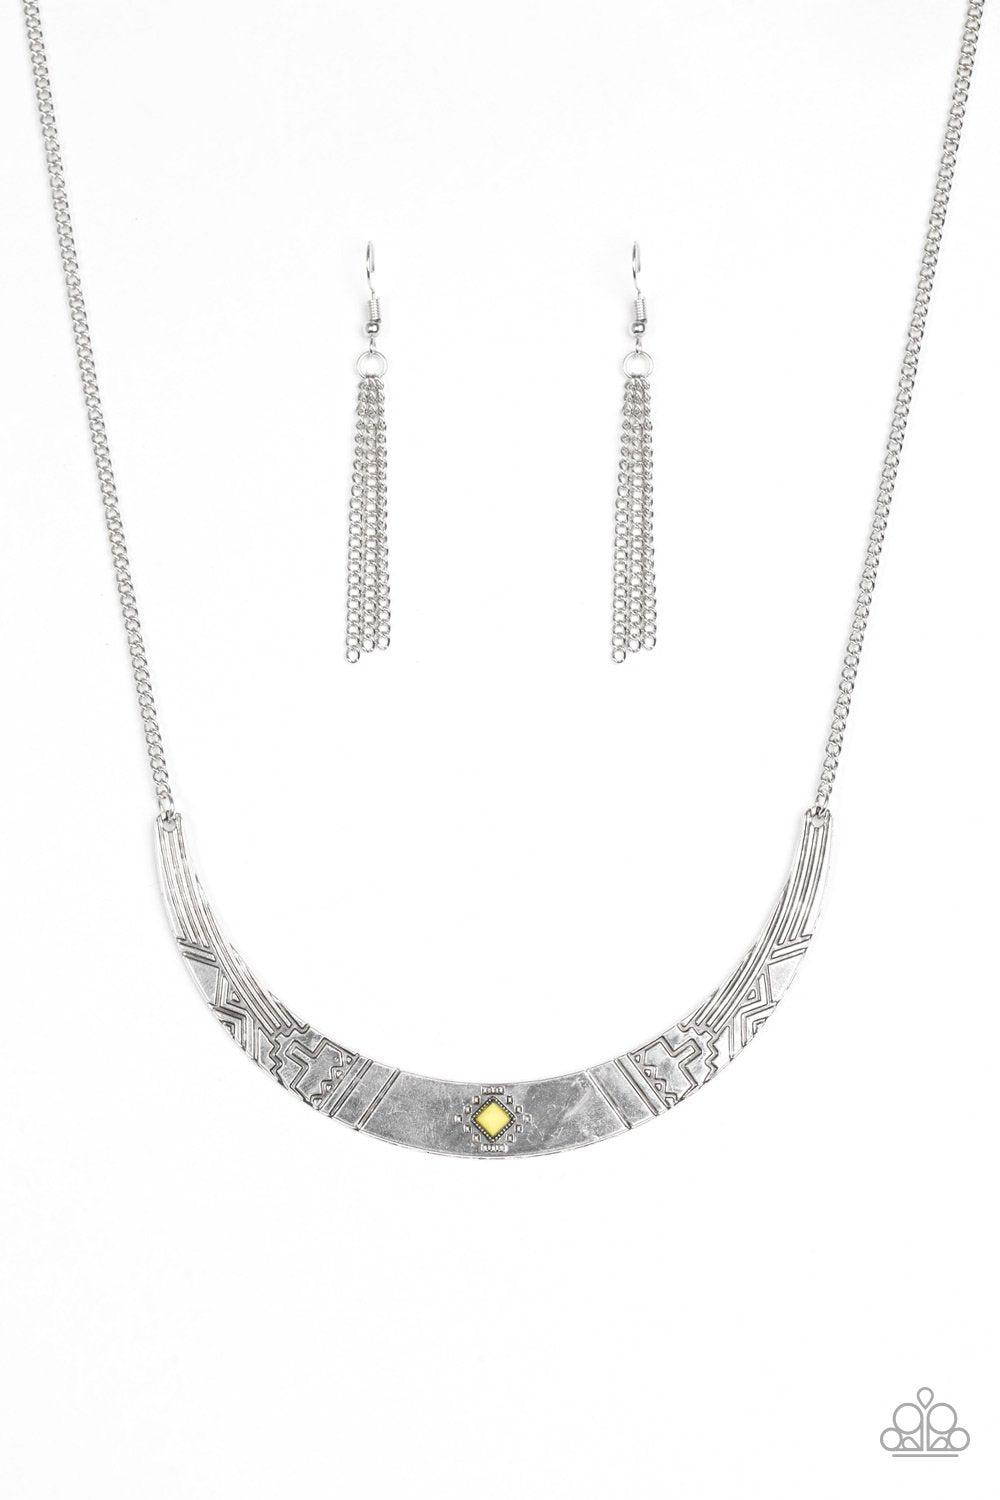 Arizona Adventure Silver and Yellow Necklace - Paparazzi Accessories-CarasShop.com - $5 Jewelry by Cara Jewels